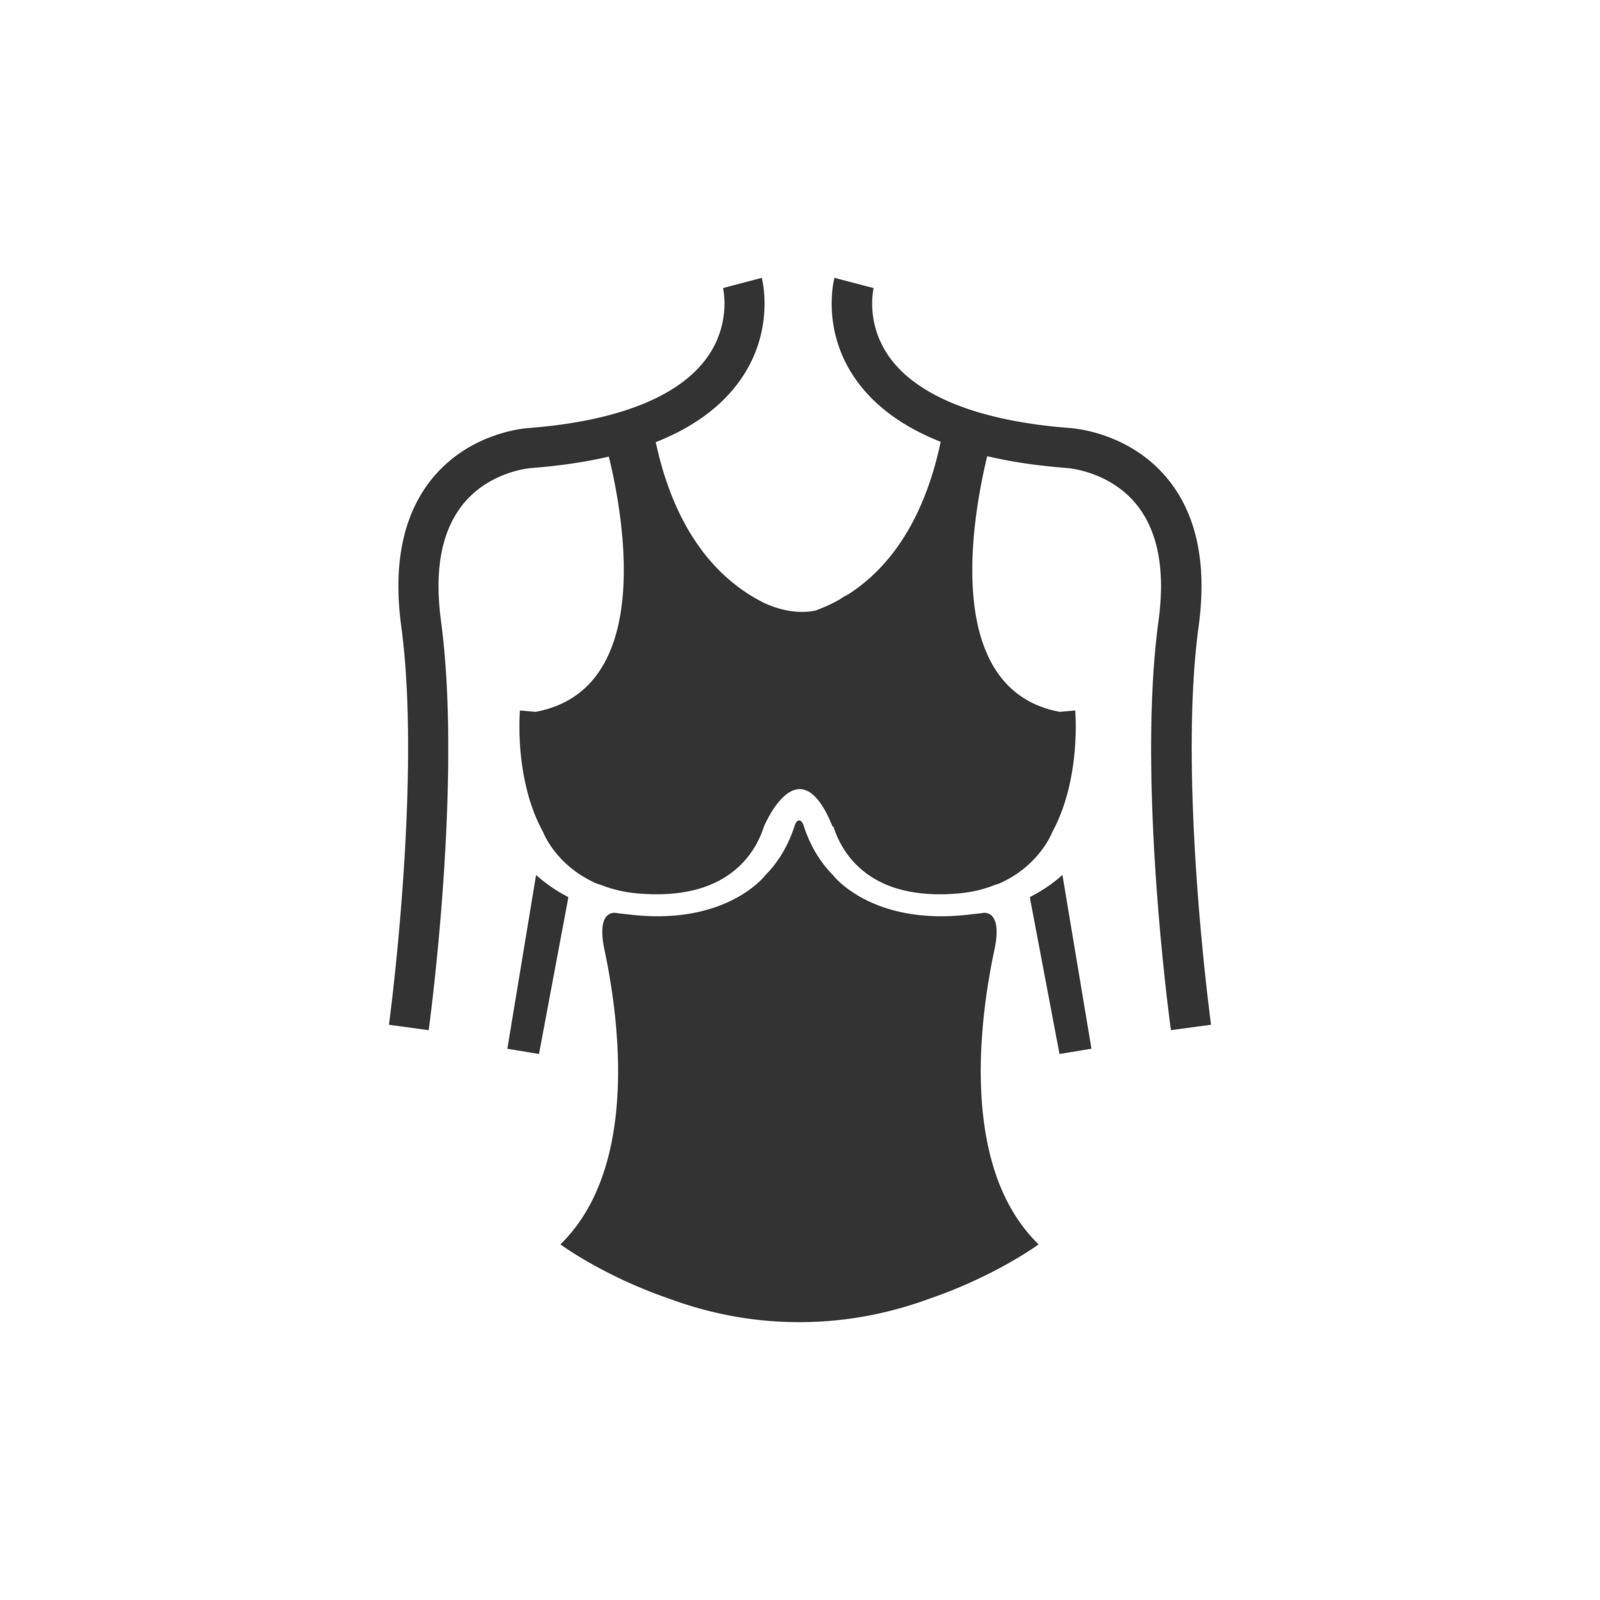 Bold Icon women body icon by barboon